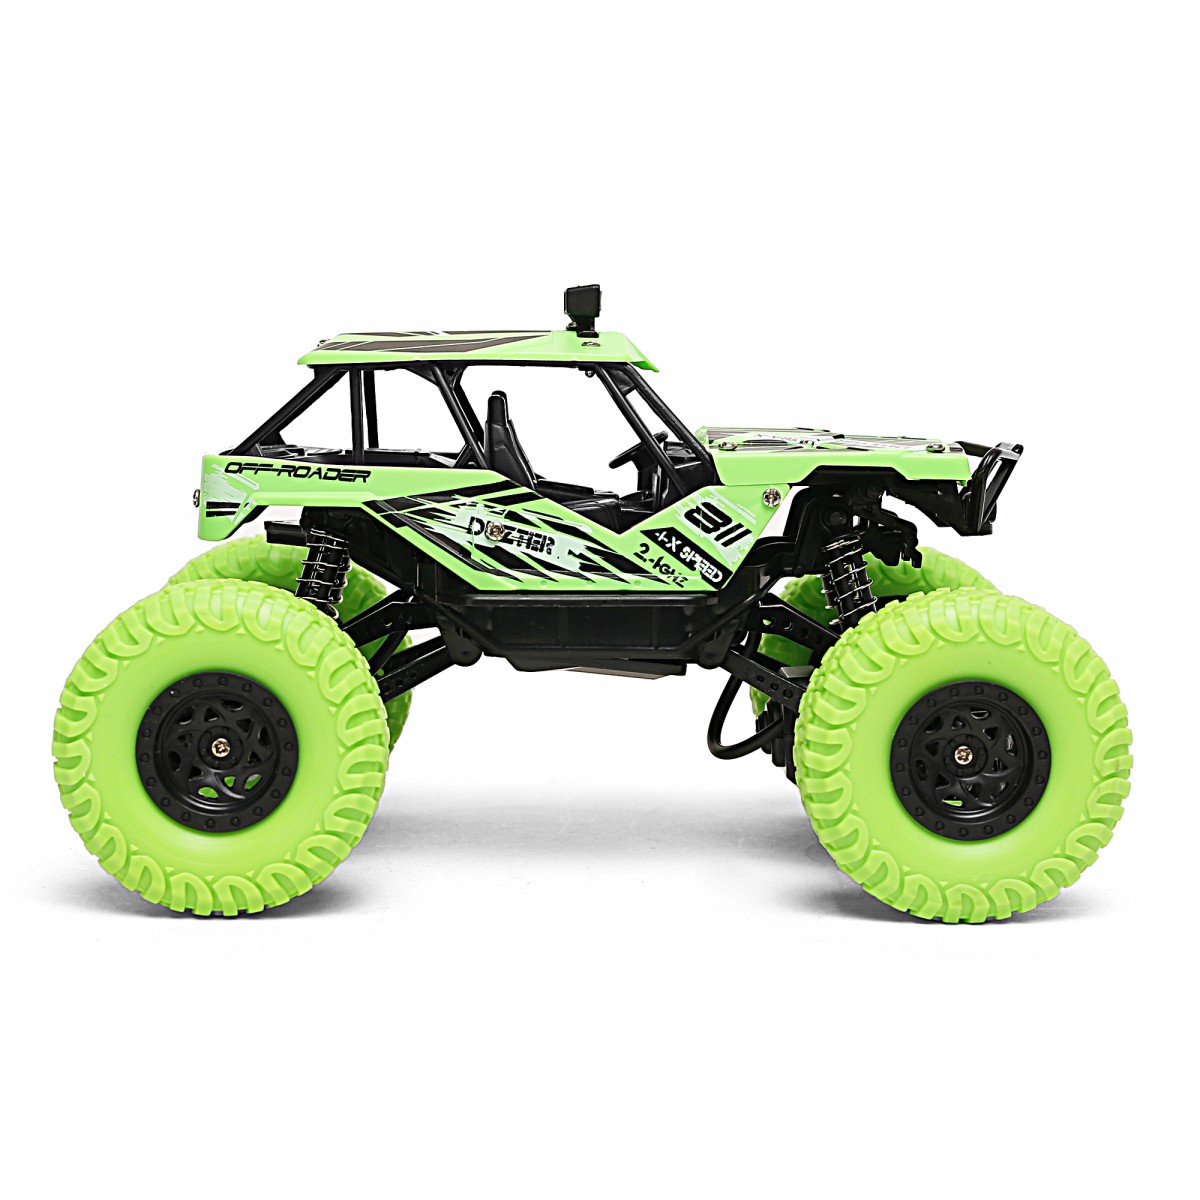 Ralleyz 1:20 Off Road Rc Car With 2.4 Ghz Remote Control 3.7V Rechargeable Battery Green 4Y+